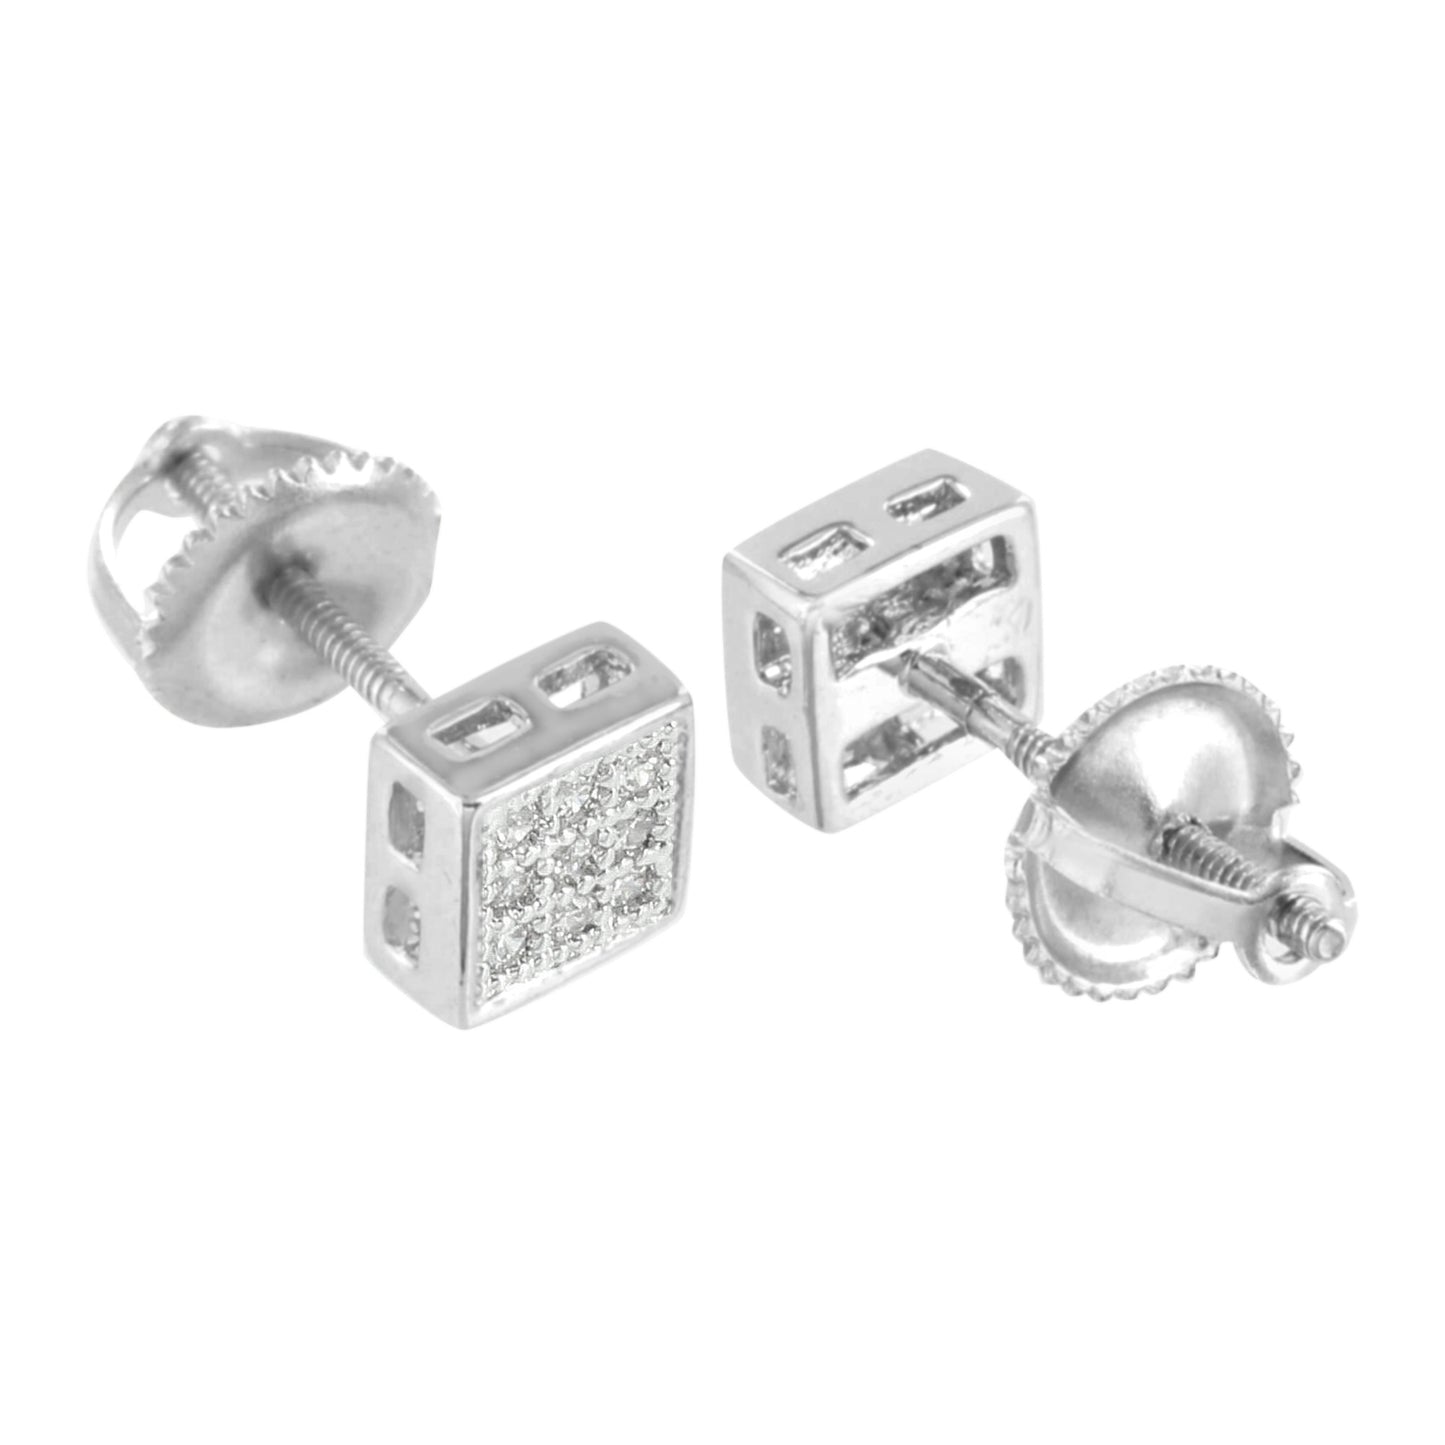 White Square Shape Earrings Screw Back Micro Pave